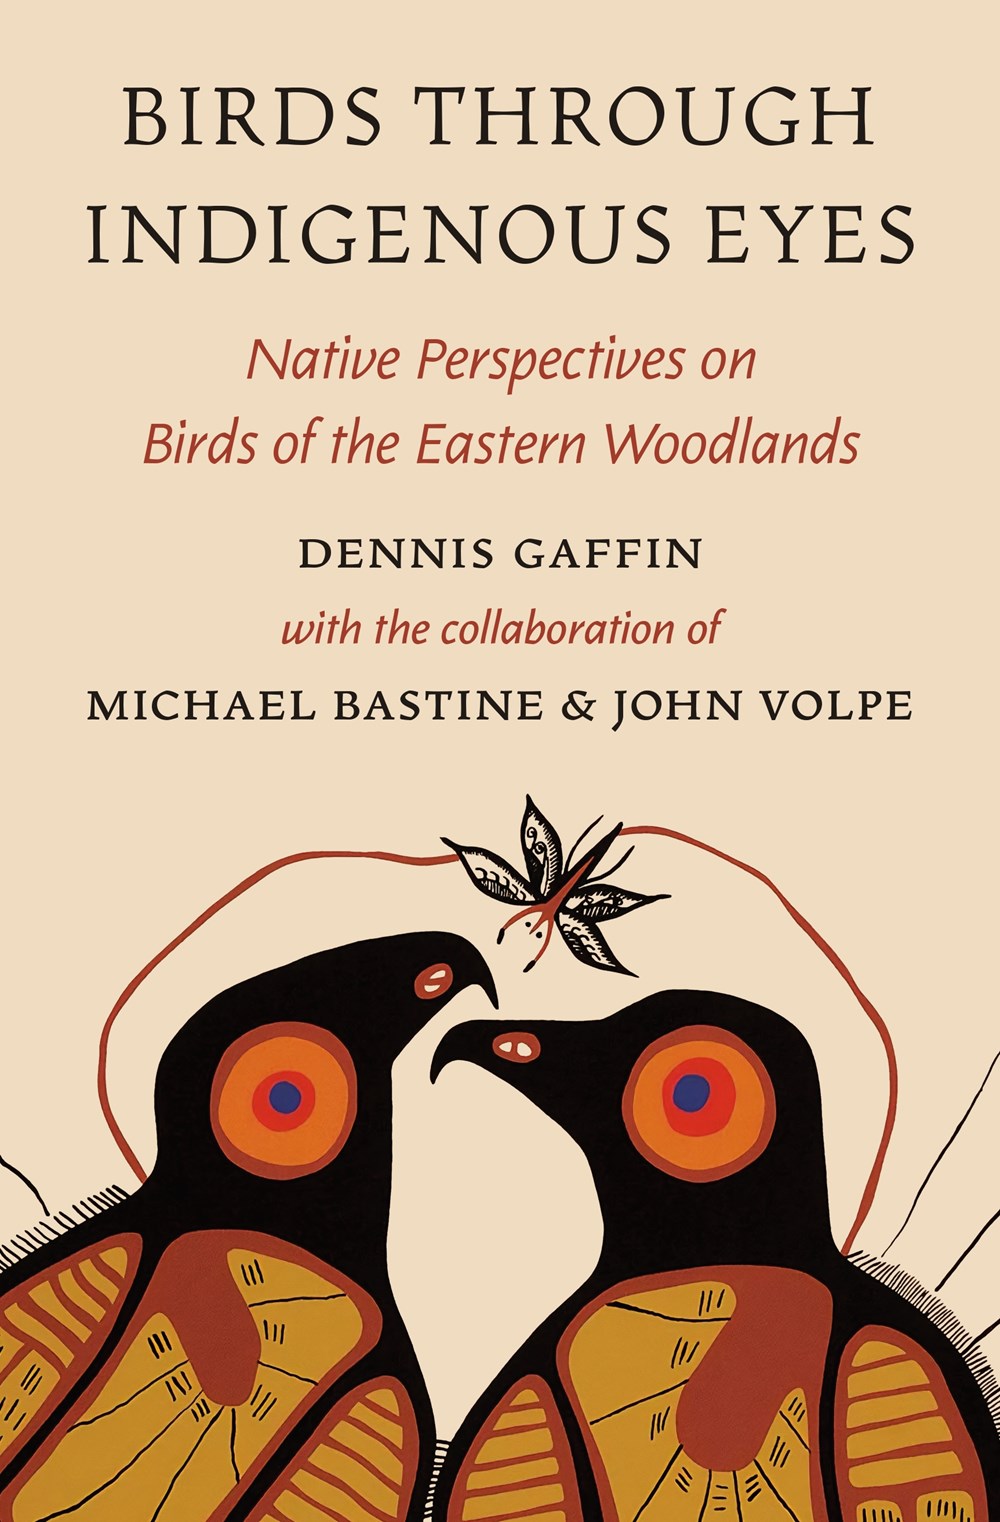 Birds Through Indigenous Eyes: Native Perspectives on Birds of the Eastern Woodlands